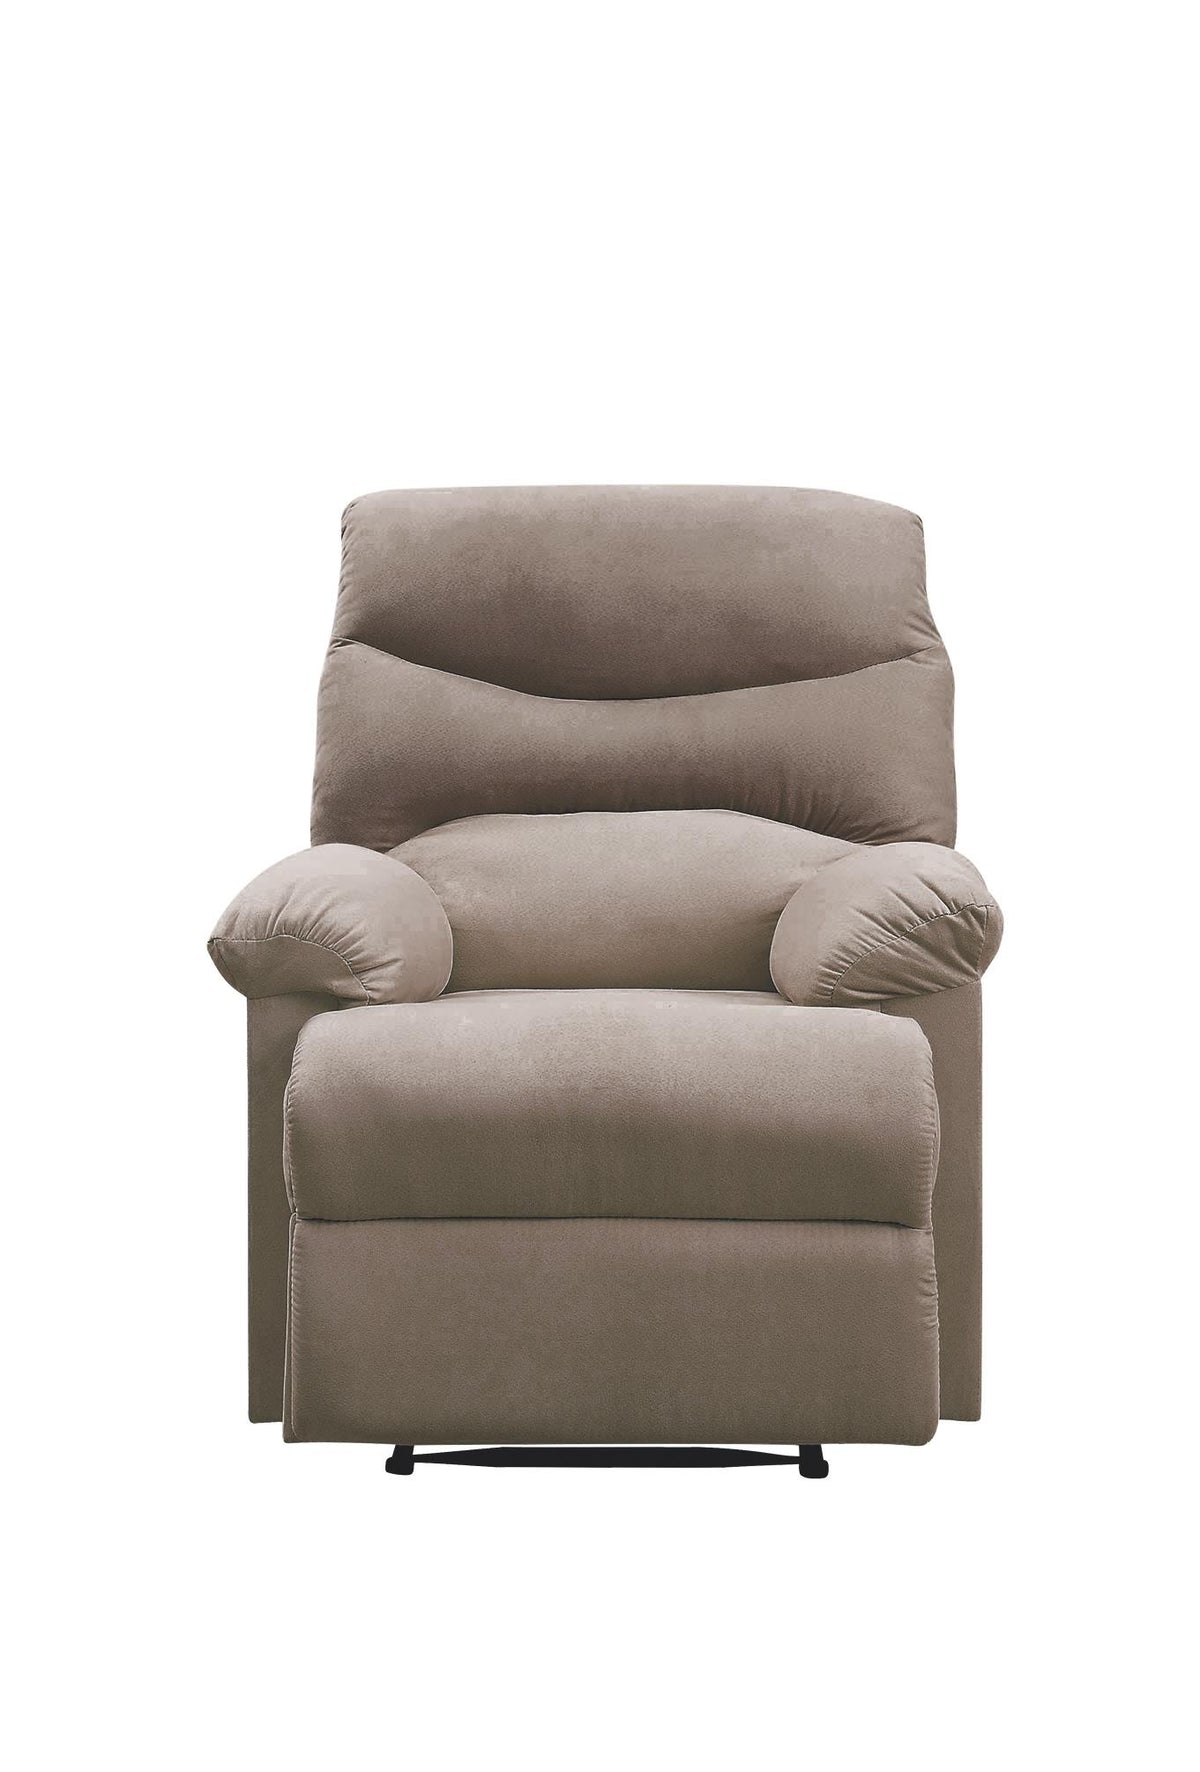 Arcadia Light Brown Woven Fabric Recliner (Motion)  Half Price Furniture